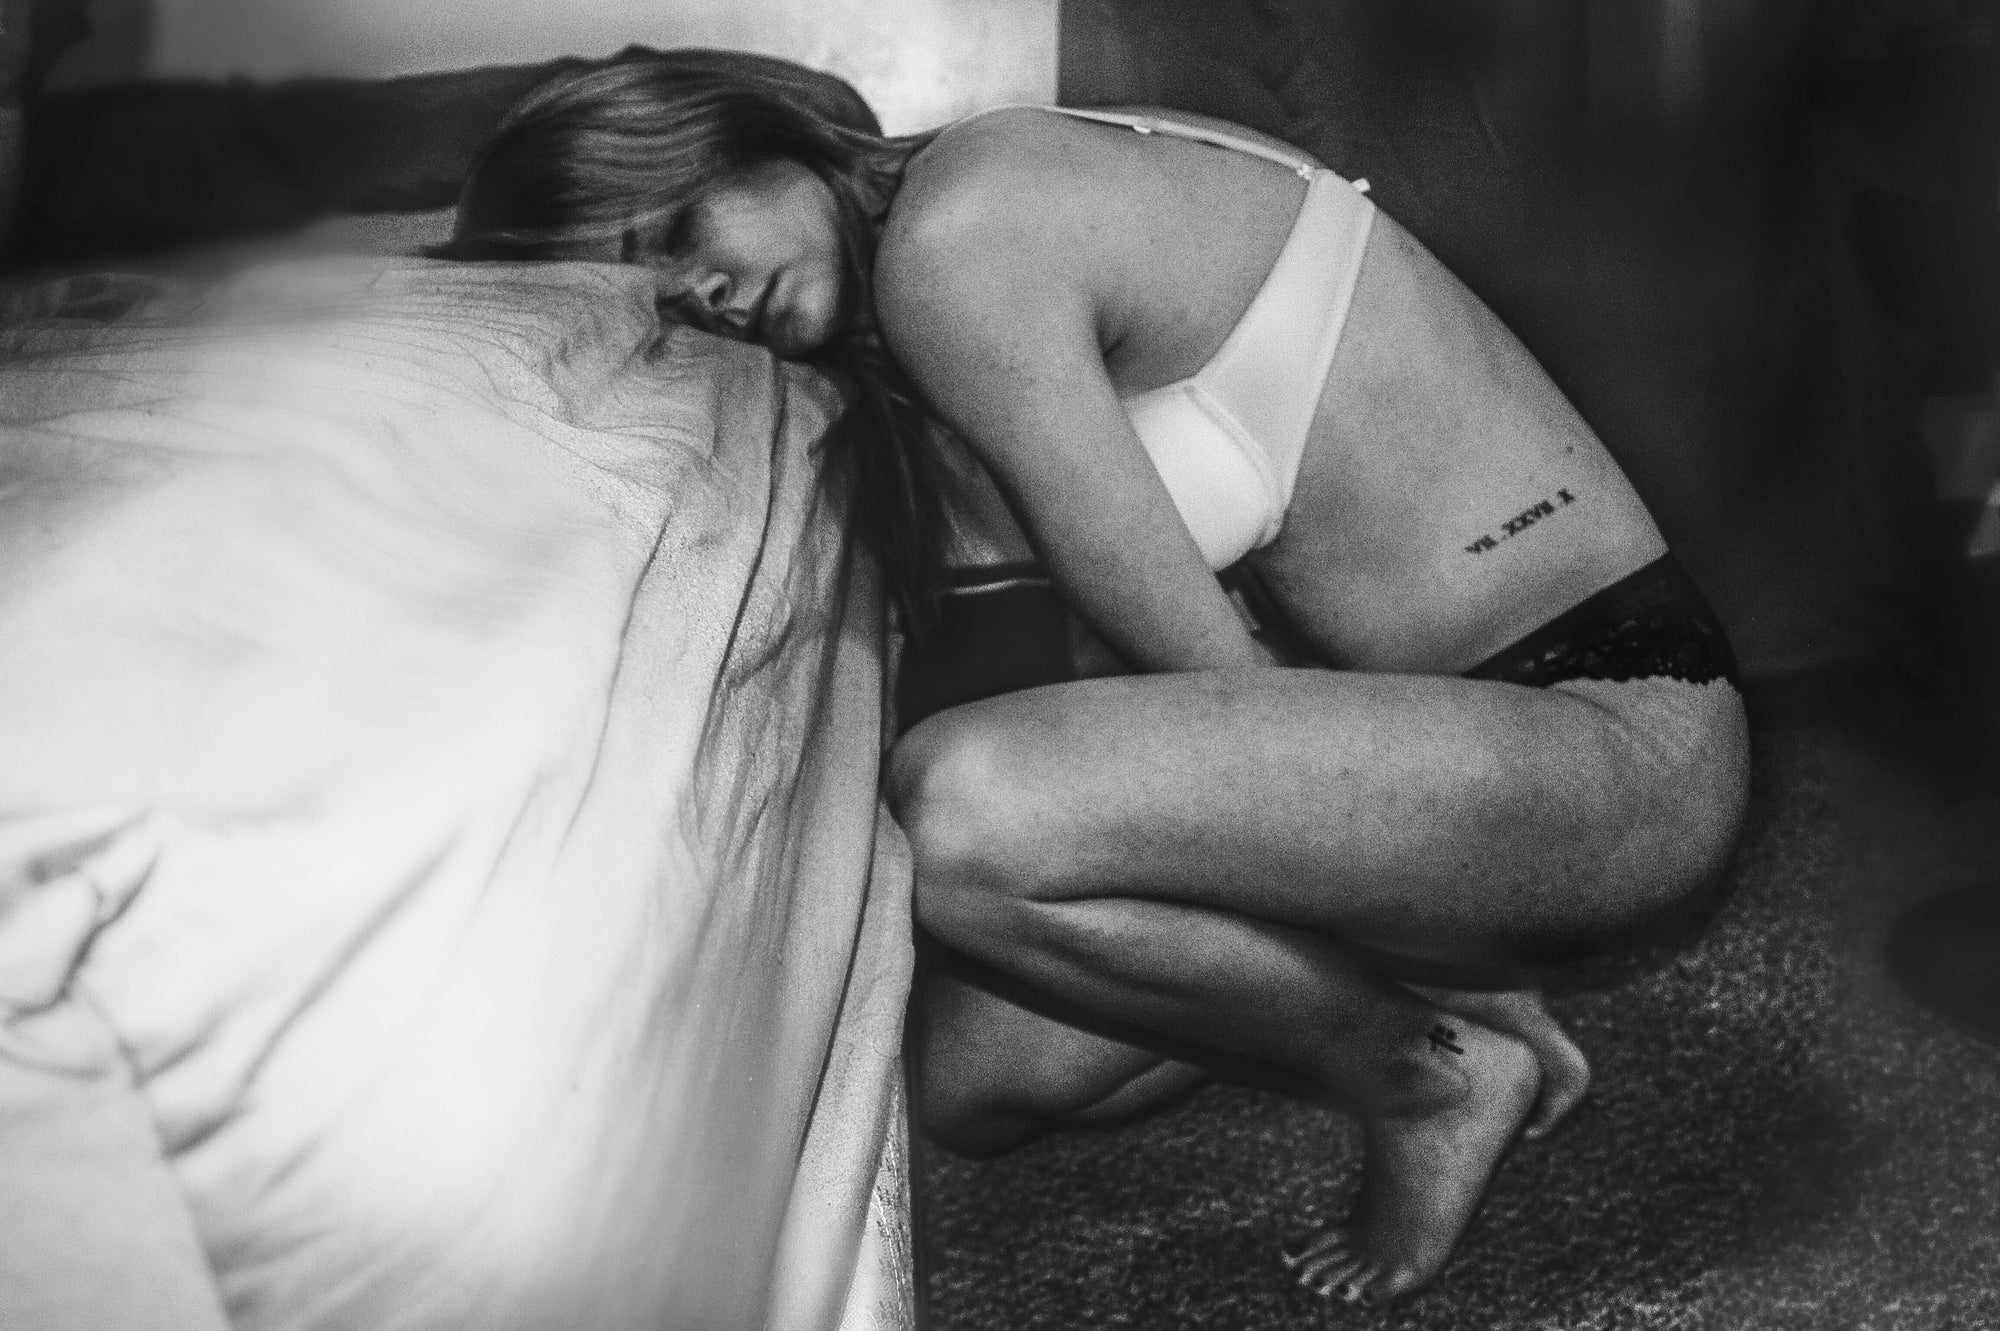 13 ways you can treat menstrual cramps (and how to finally say ‘bye Felicia’ to it)